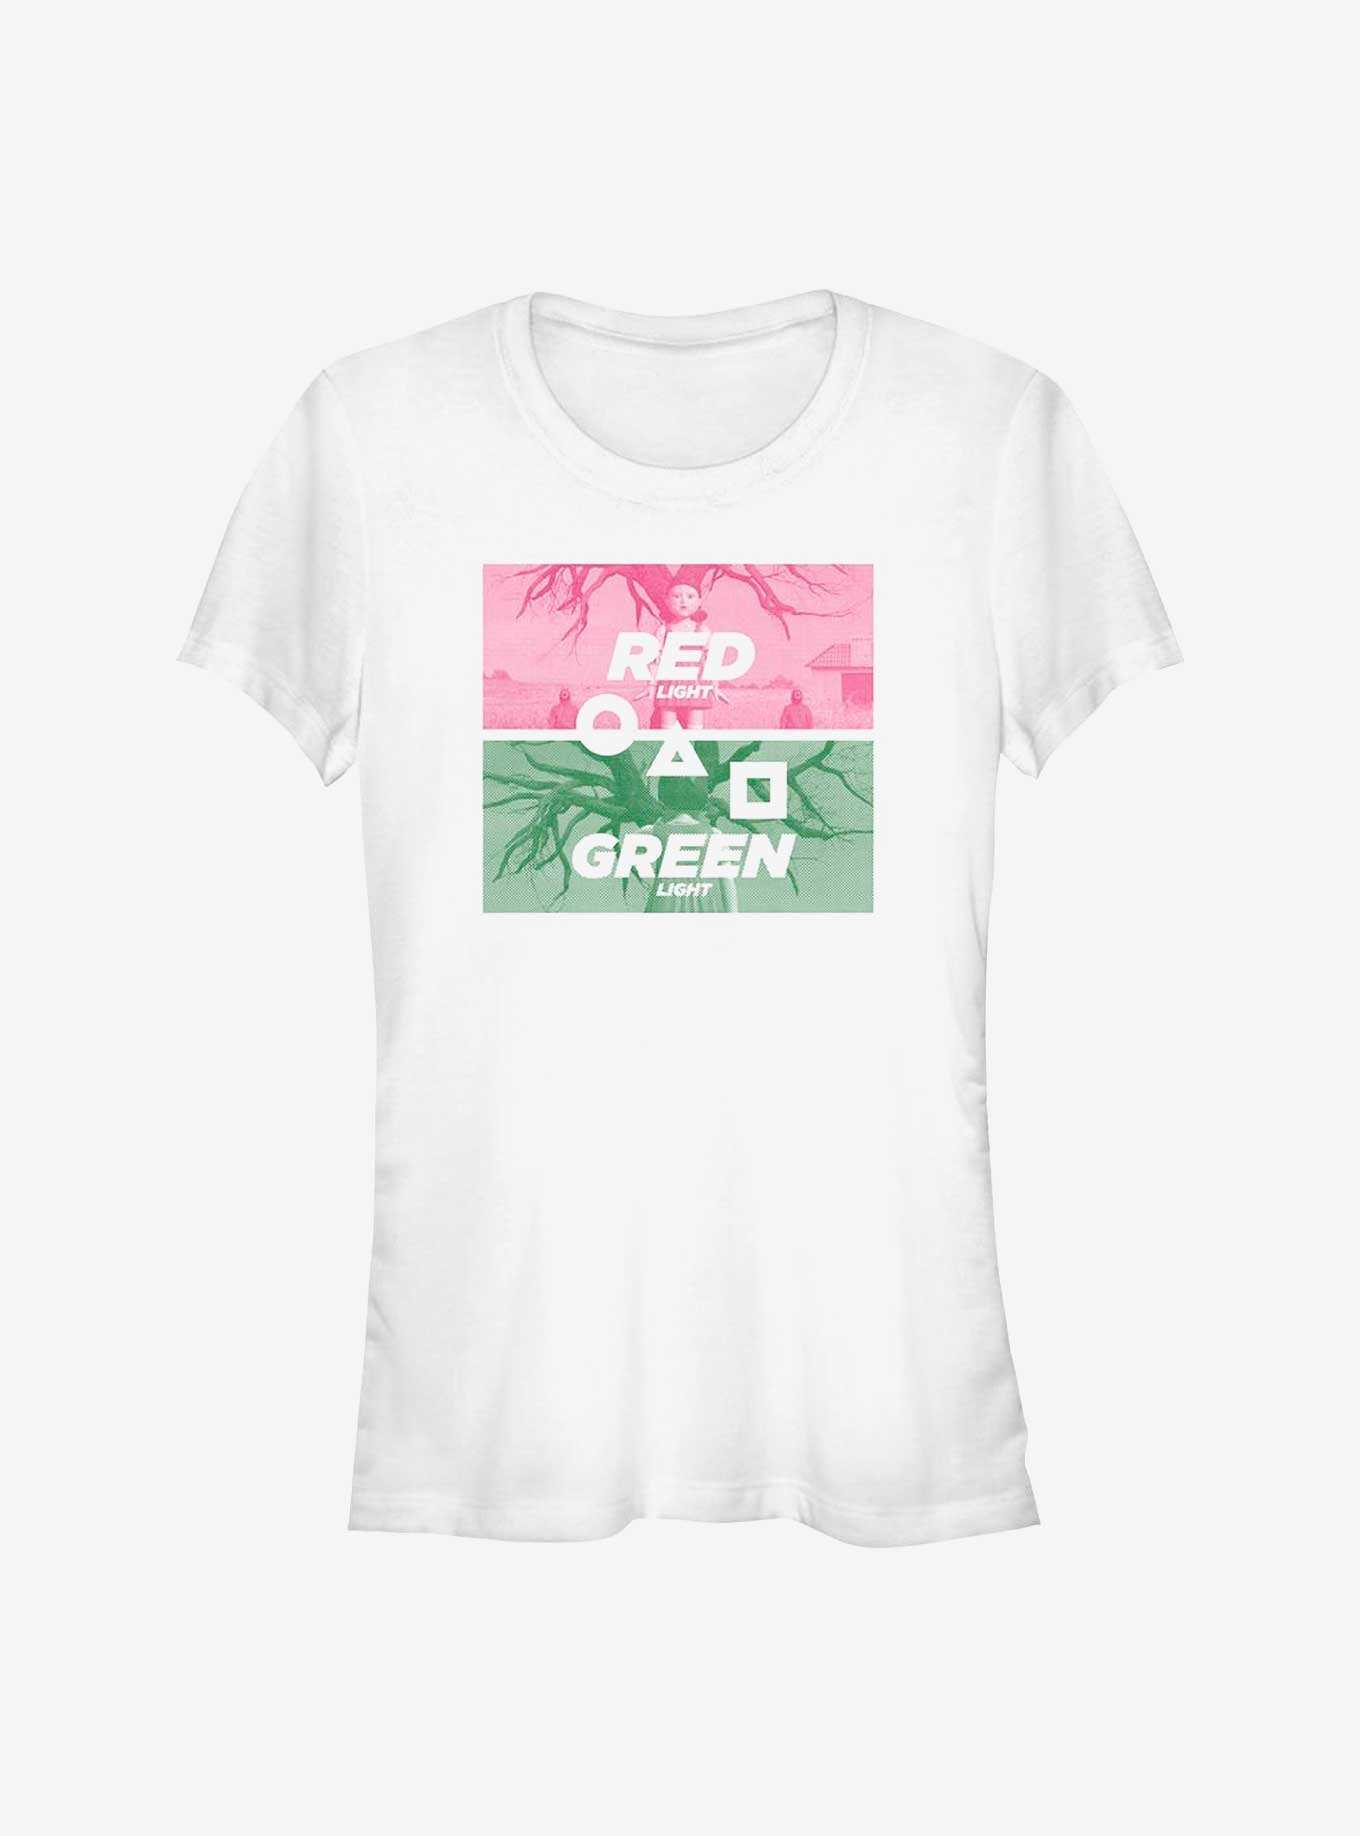 Squid Game First Game Red Light Green Light Girls T-Shirt, , hi-res